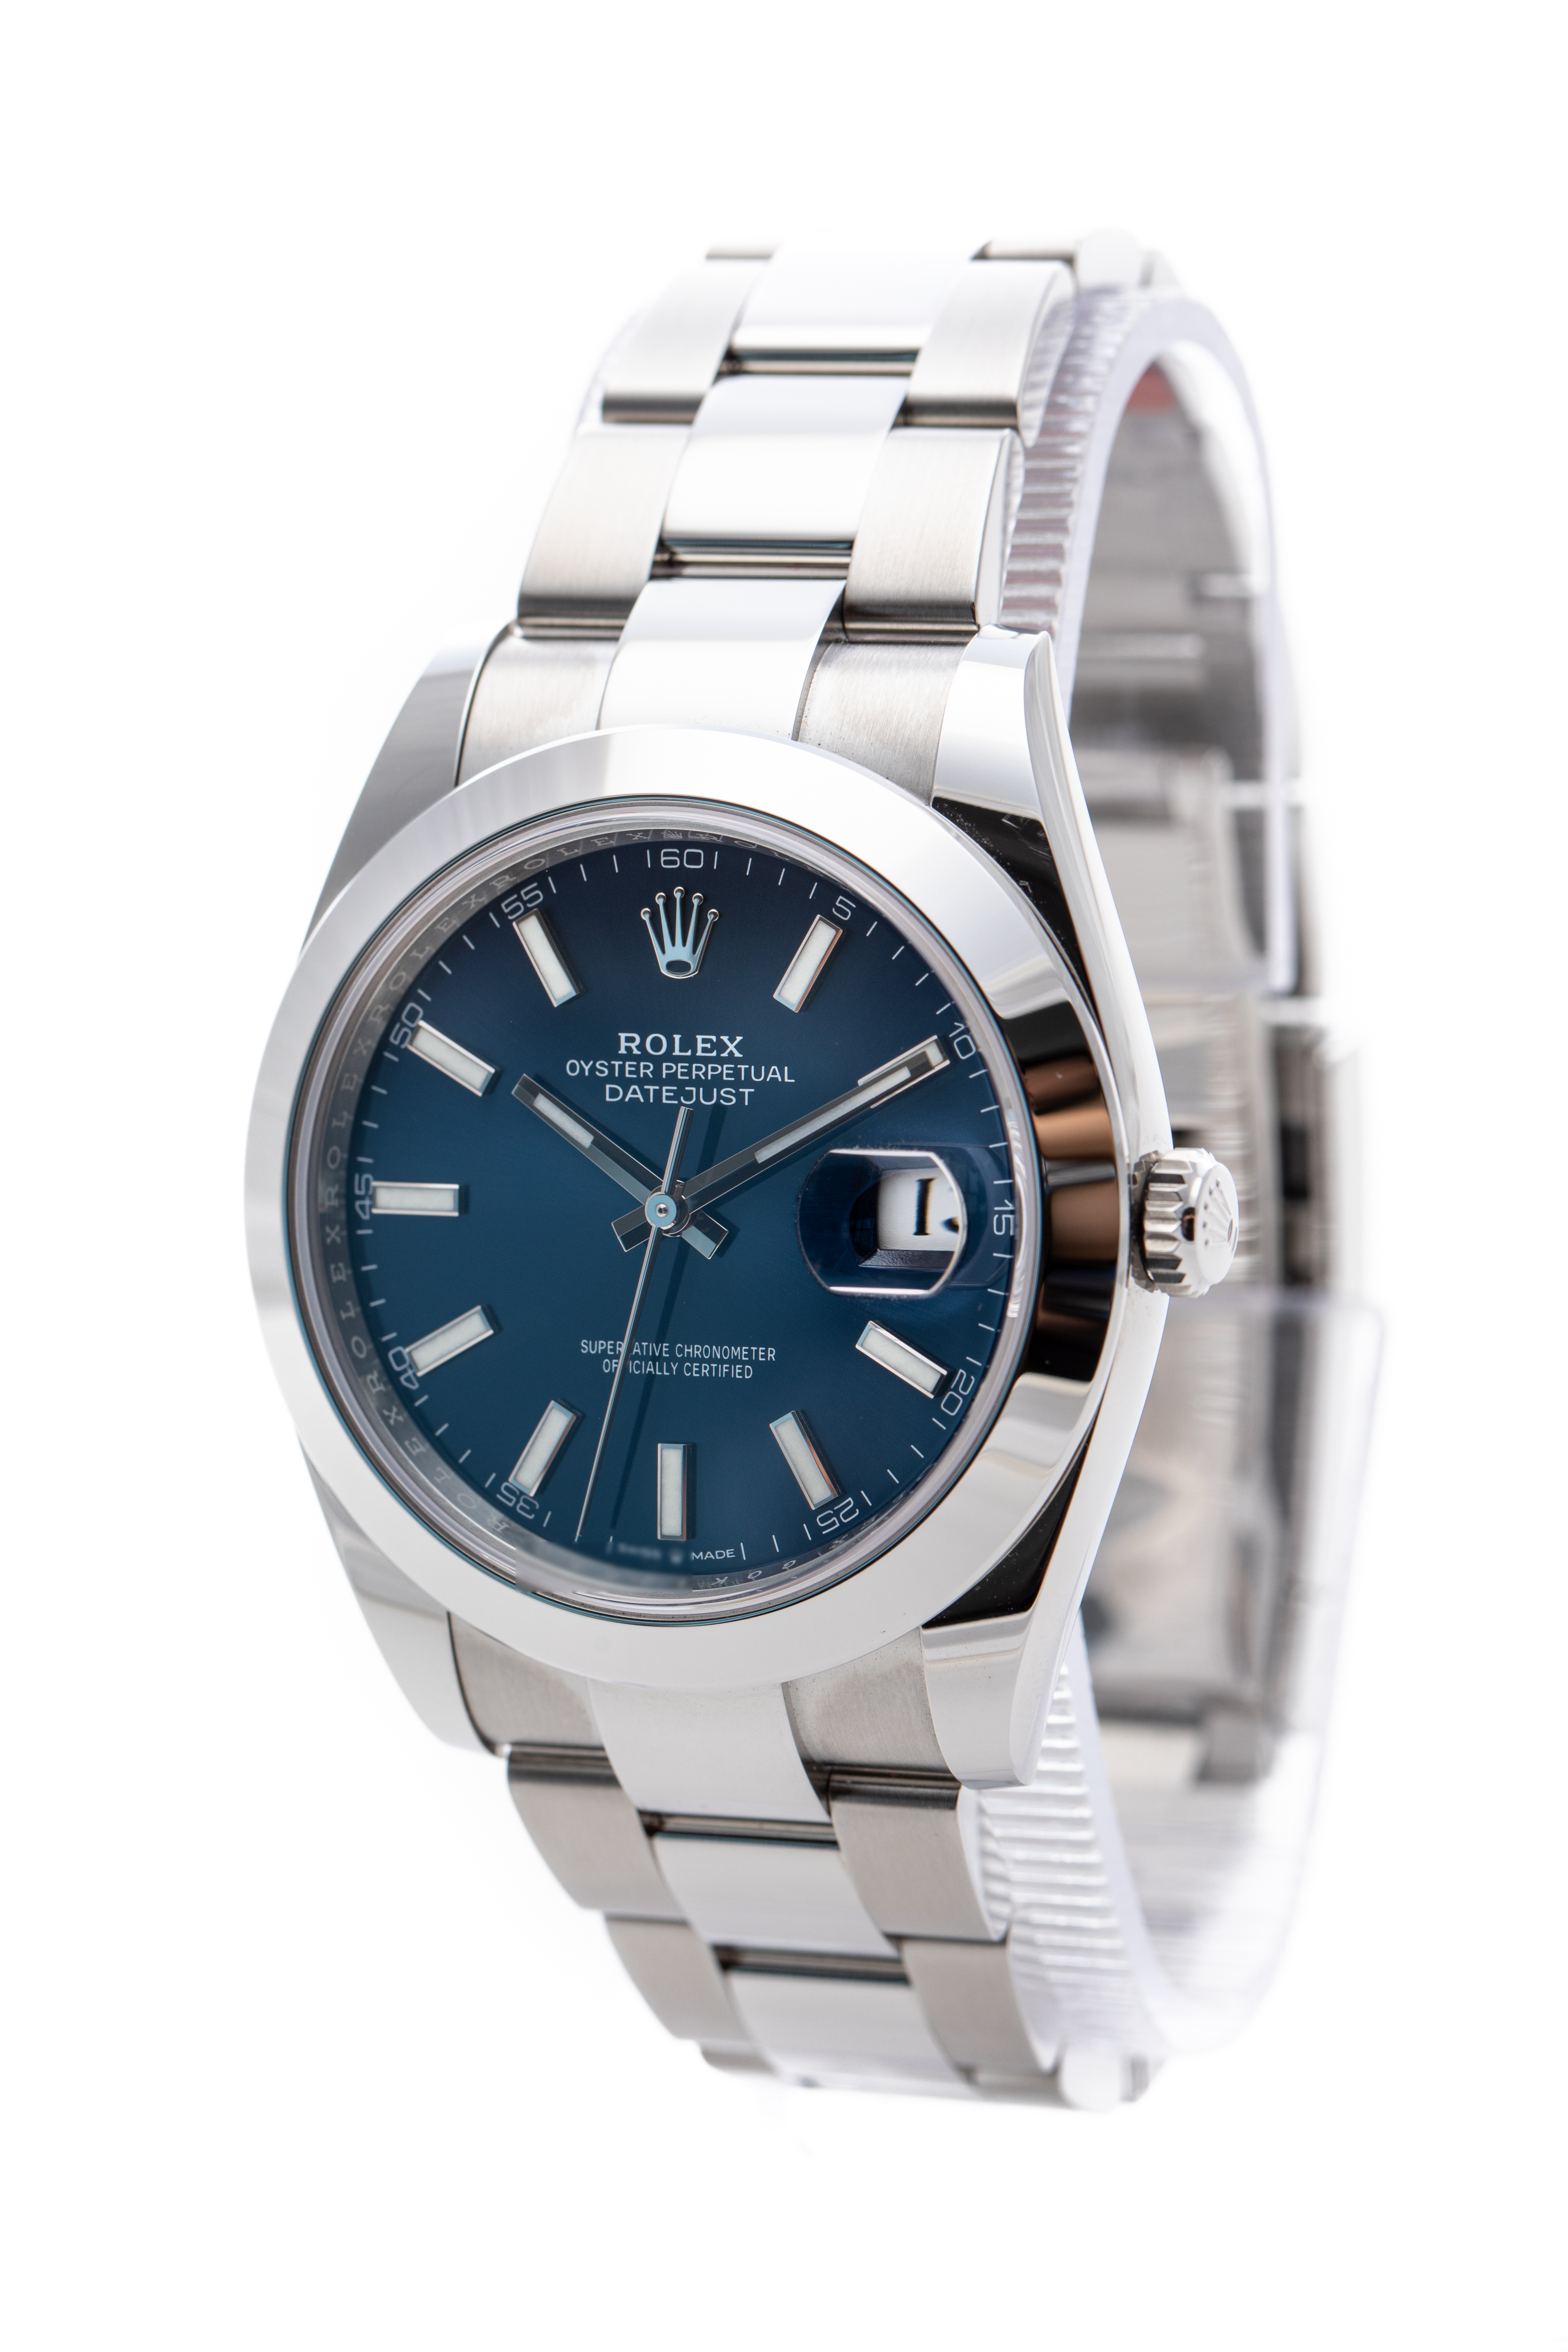 ROLEX DATEJUST 41 STAINLESS STEEL BLUE DIAL FULL BOX&PAPERS 2022 REF: 126300